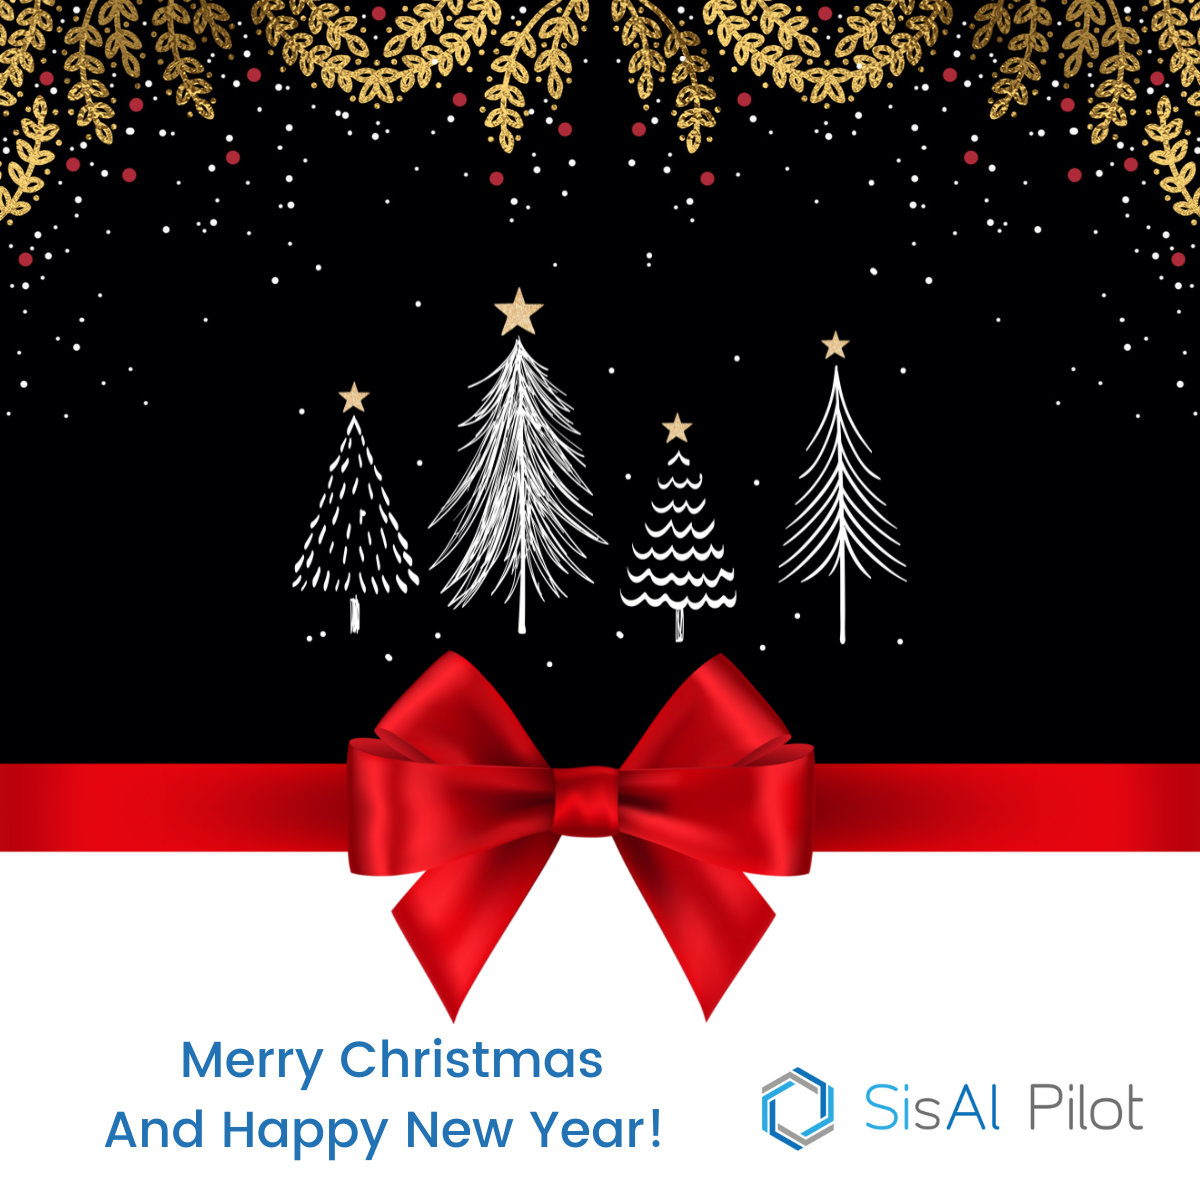 Best wishes from SisAl Pilot!